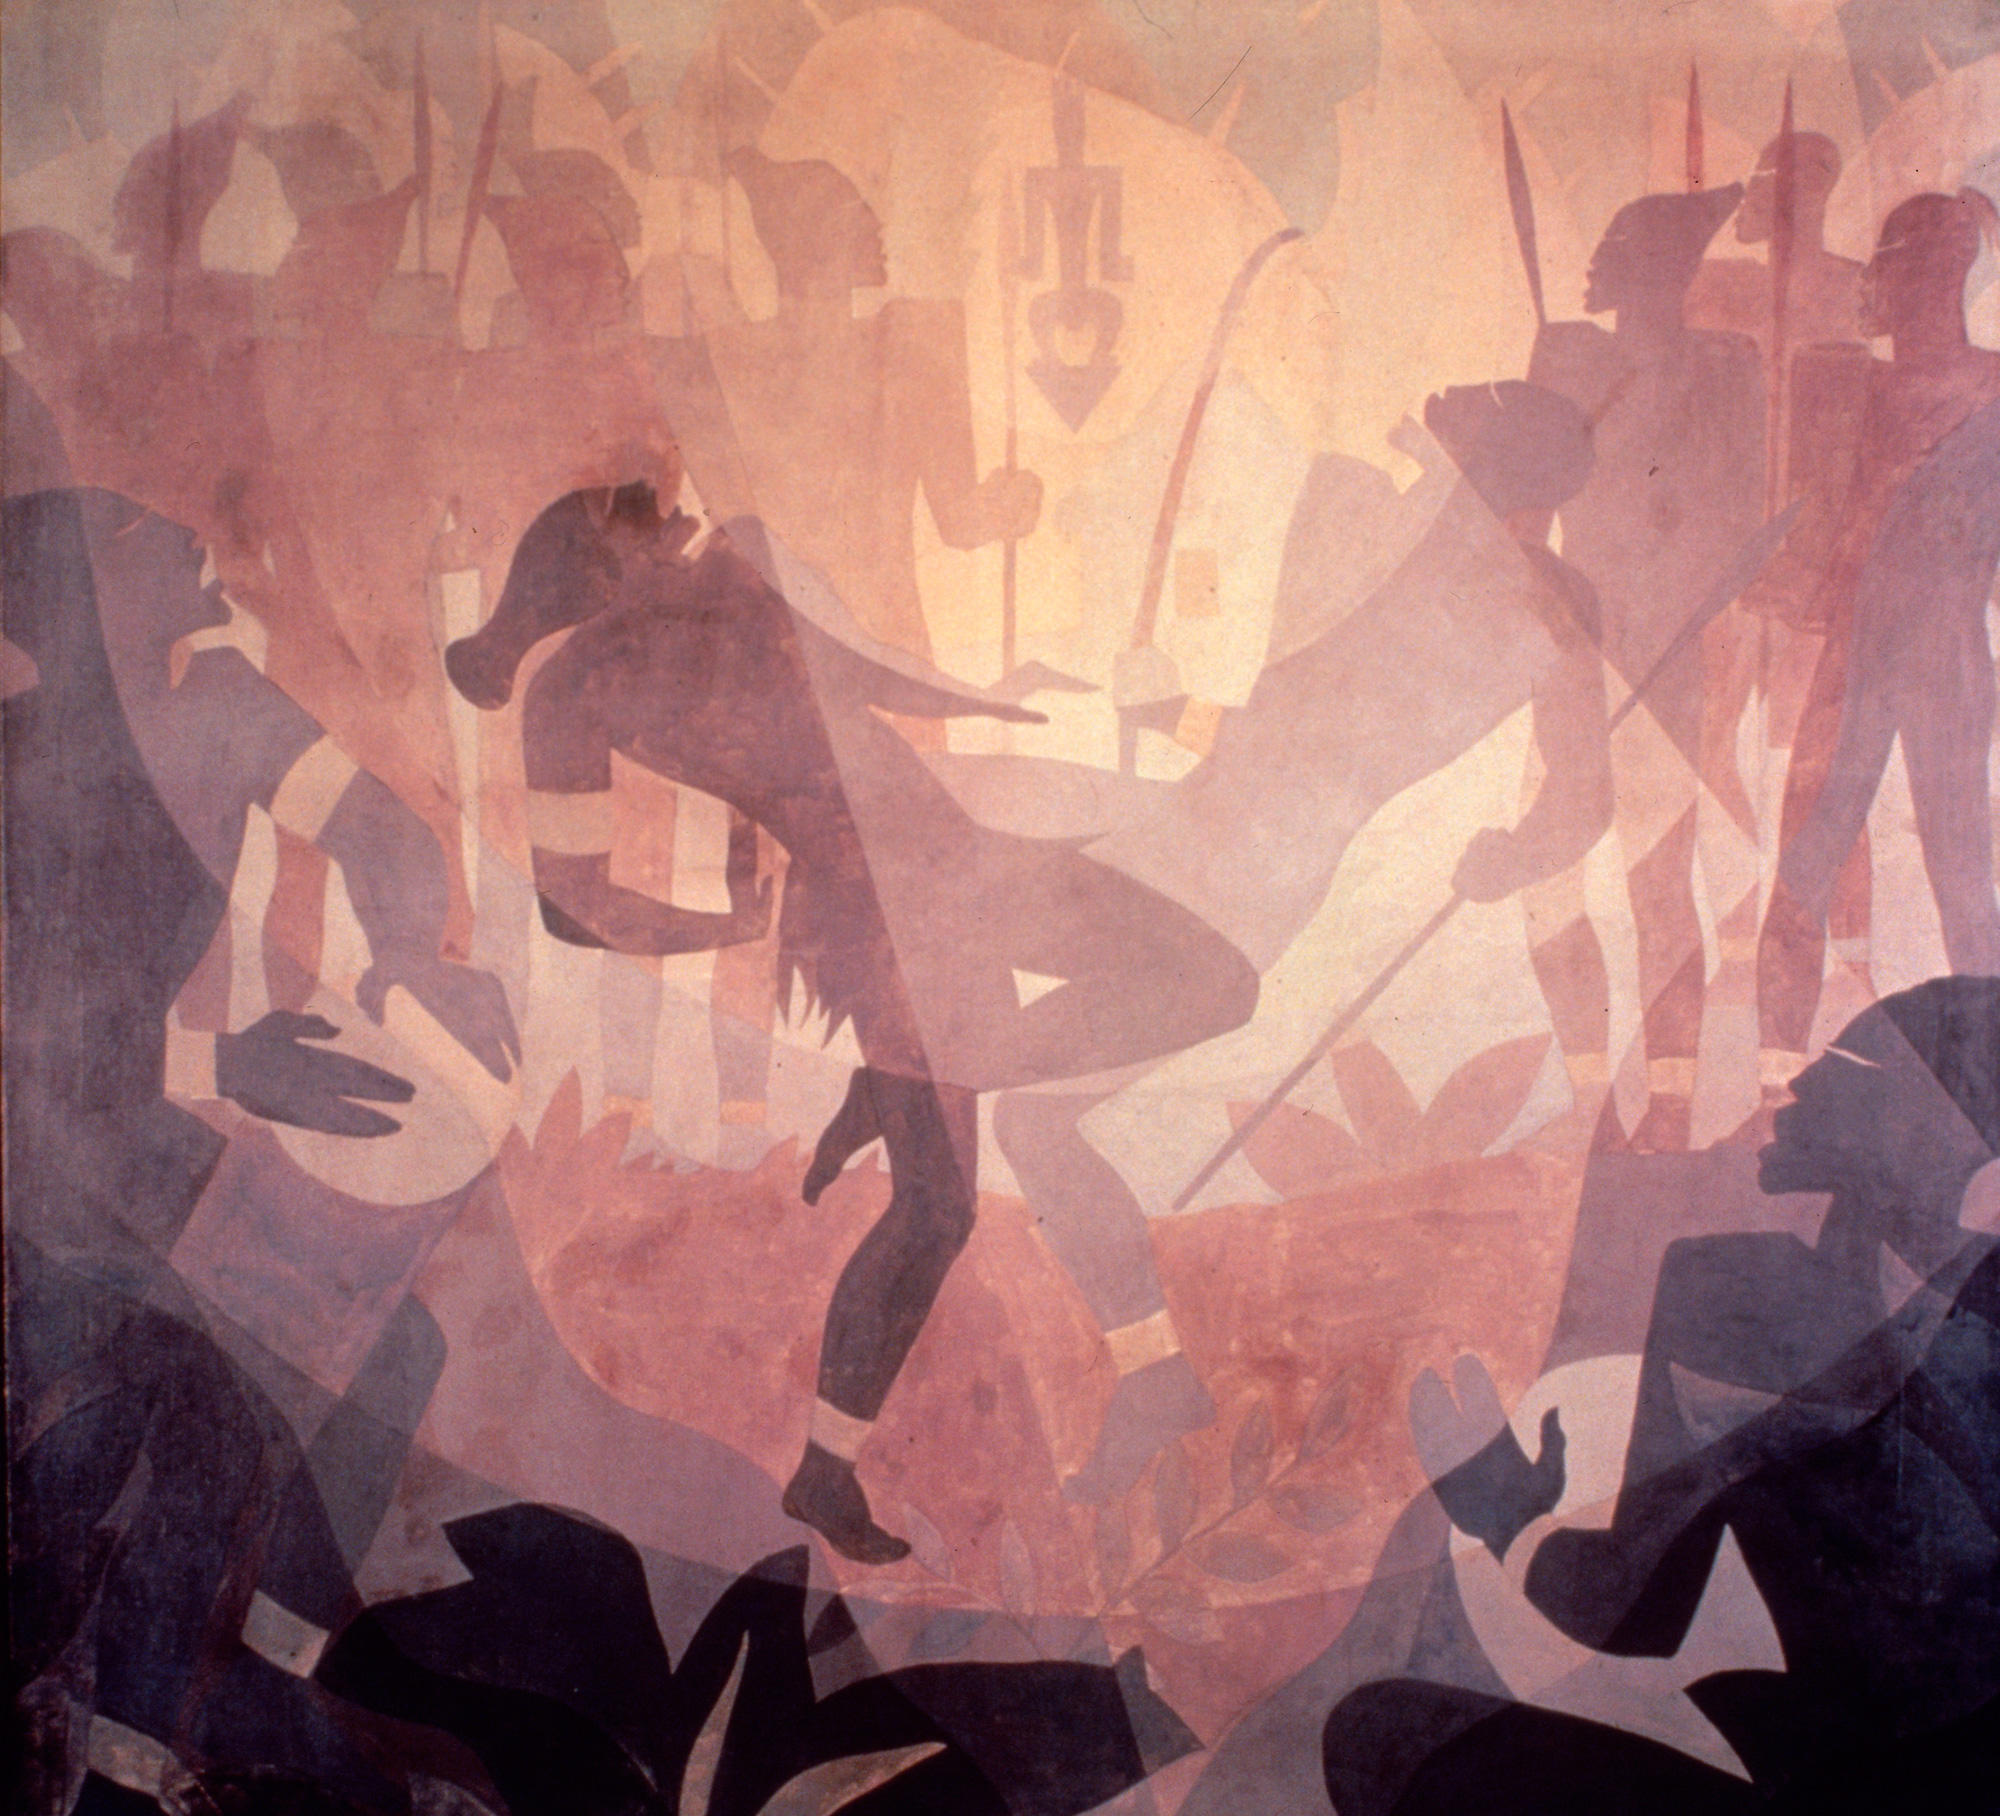 "Aspects of Negro Life: The Negro in an African Setting" by Aaron Douglas